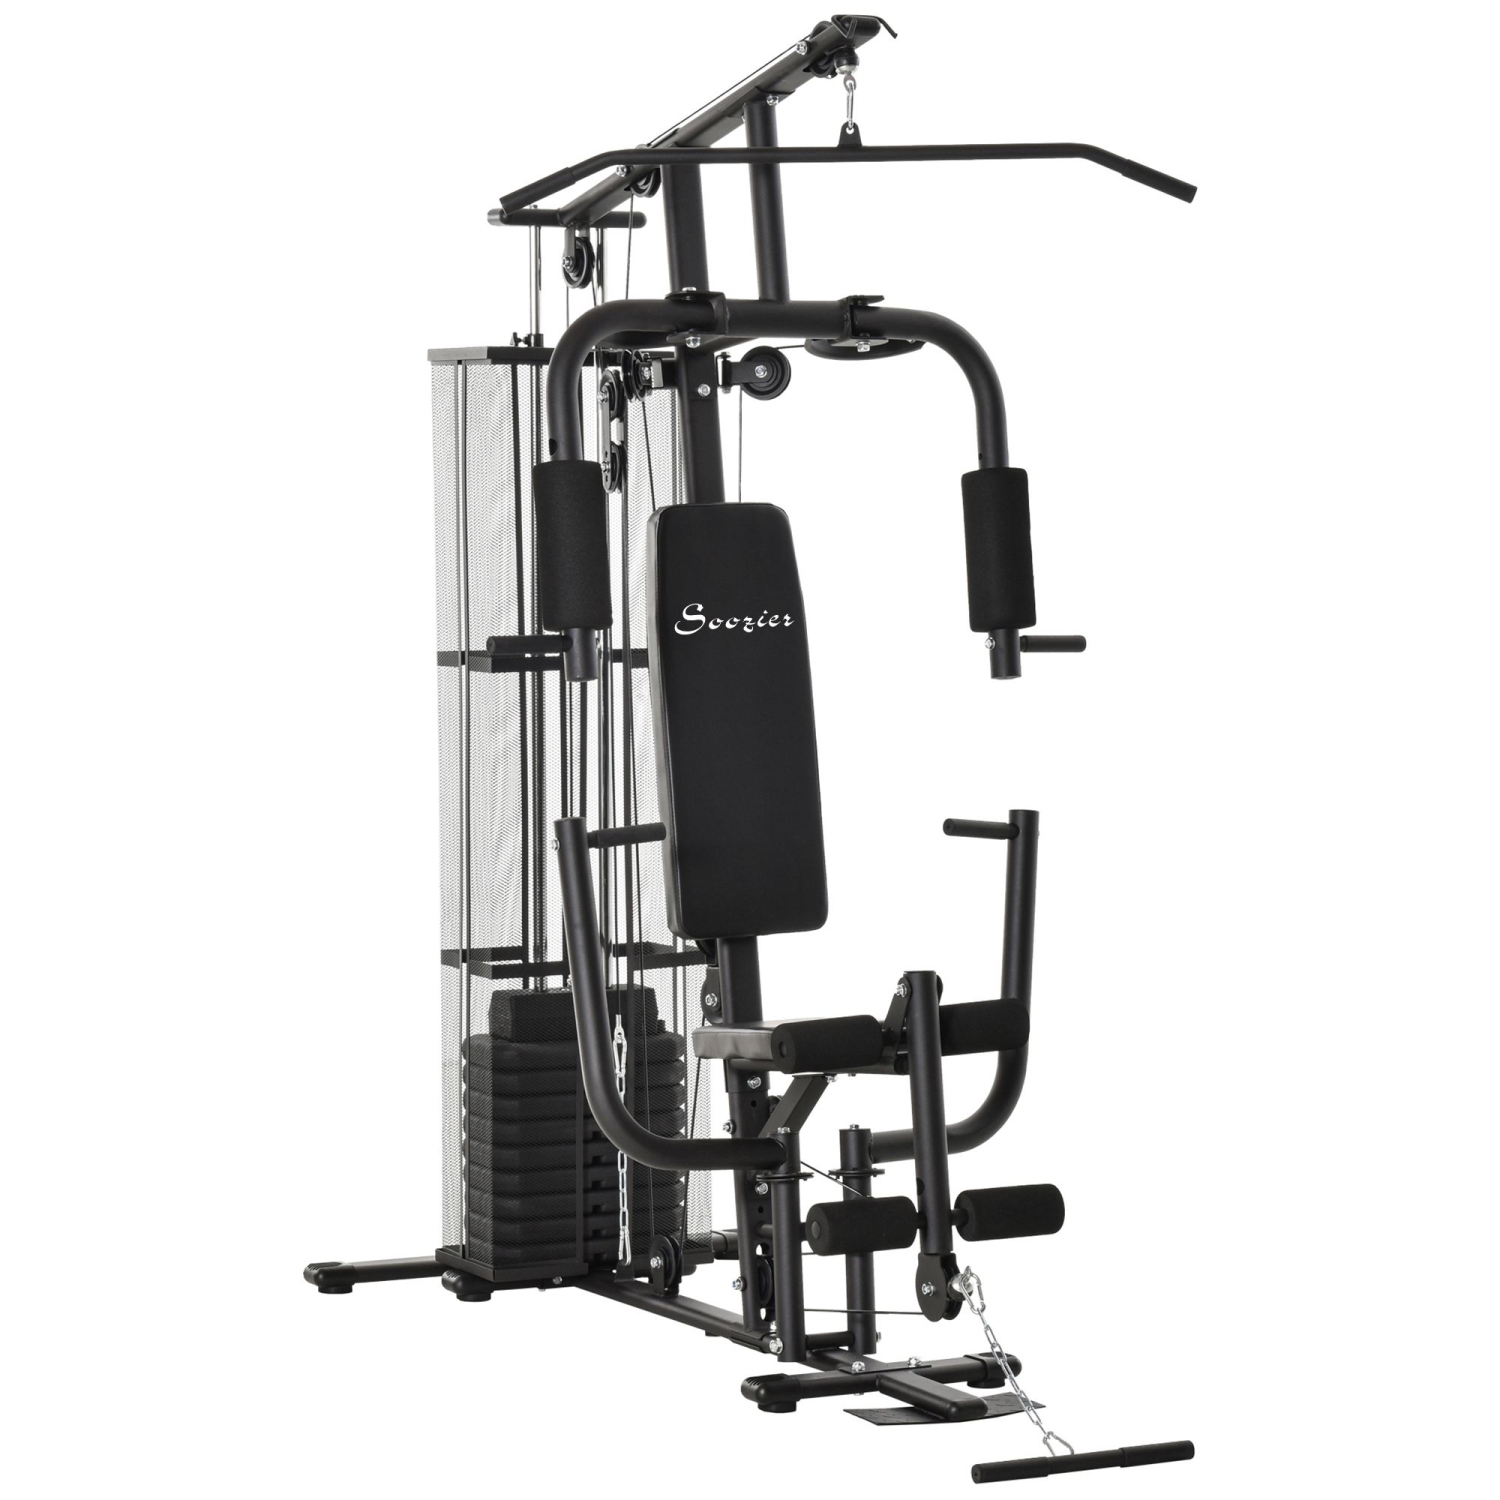 Buy FEMIRO FITNESS Home Gym Multi Machine All-in-one Equipment for Men & Women  Workout Machine Chest Biceps Shoulder Back Triceps Legs Muscle Multiple Exercise  at Home, (Multi-Color) (HG-212 - Premium) Online at